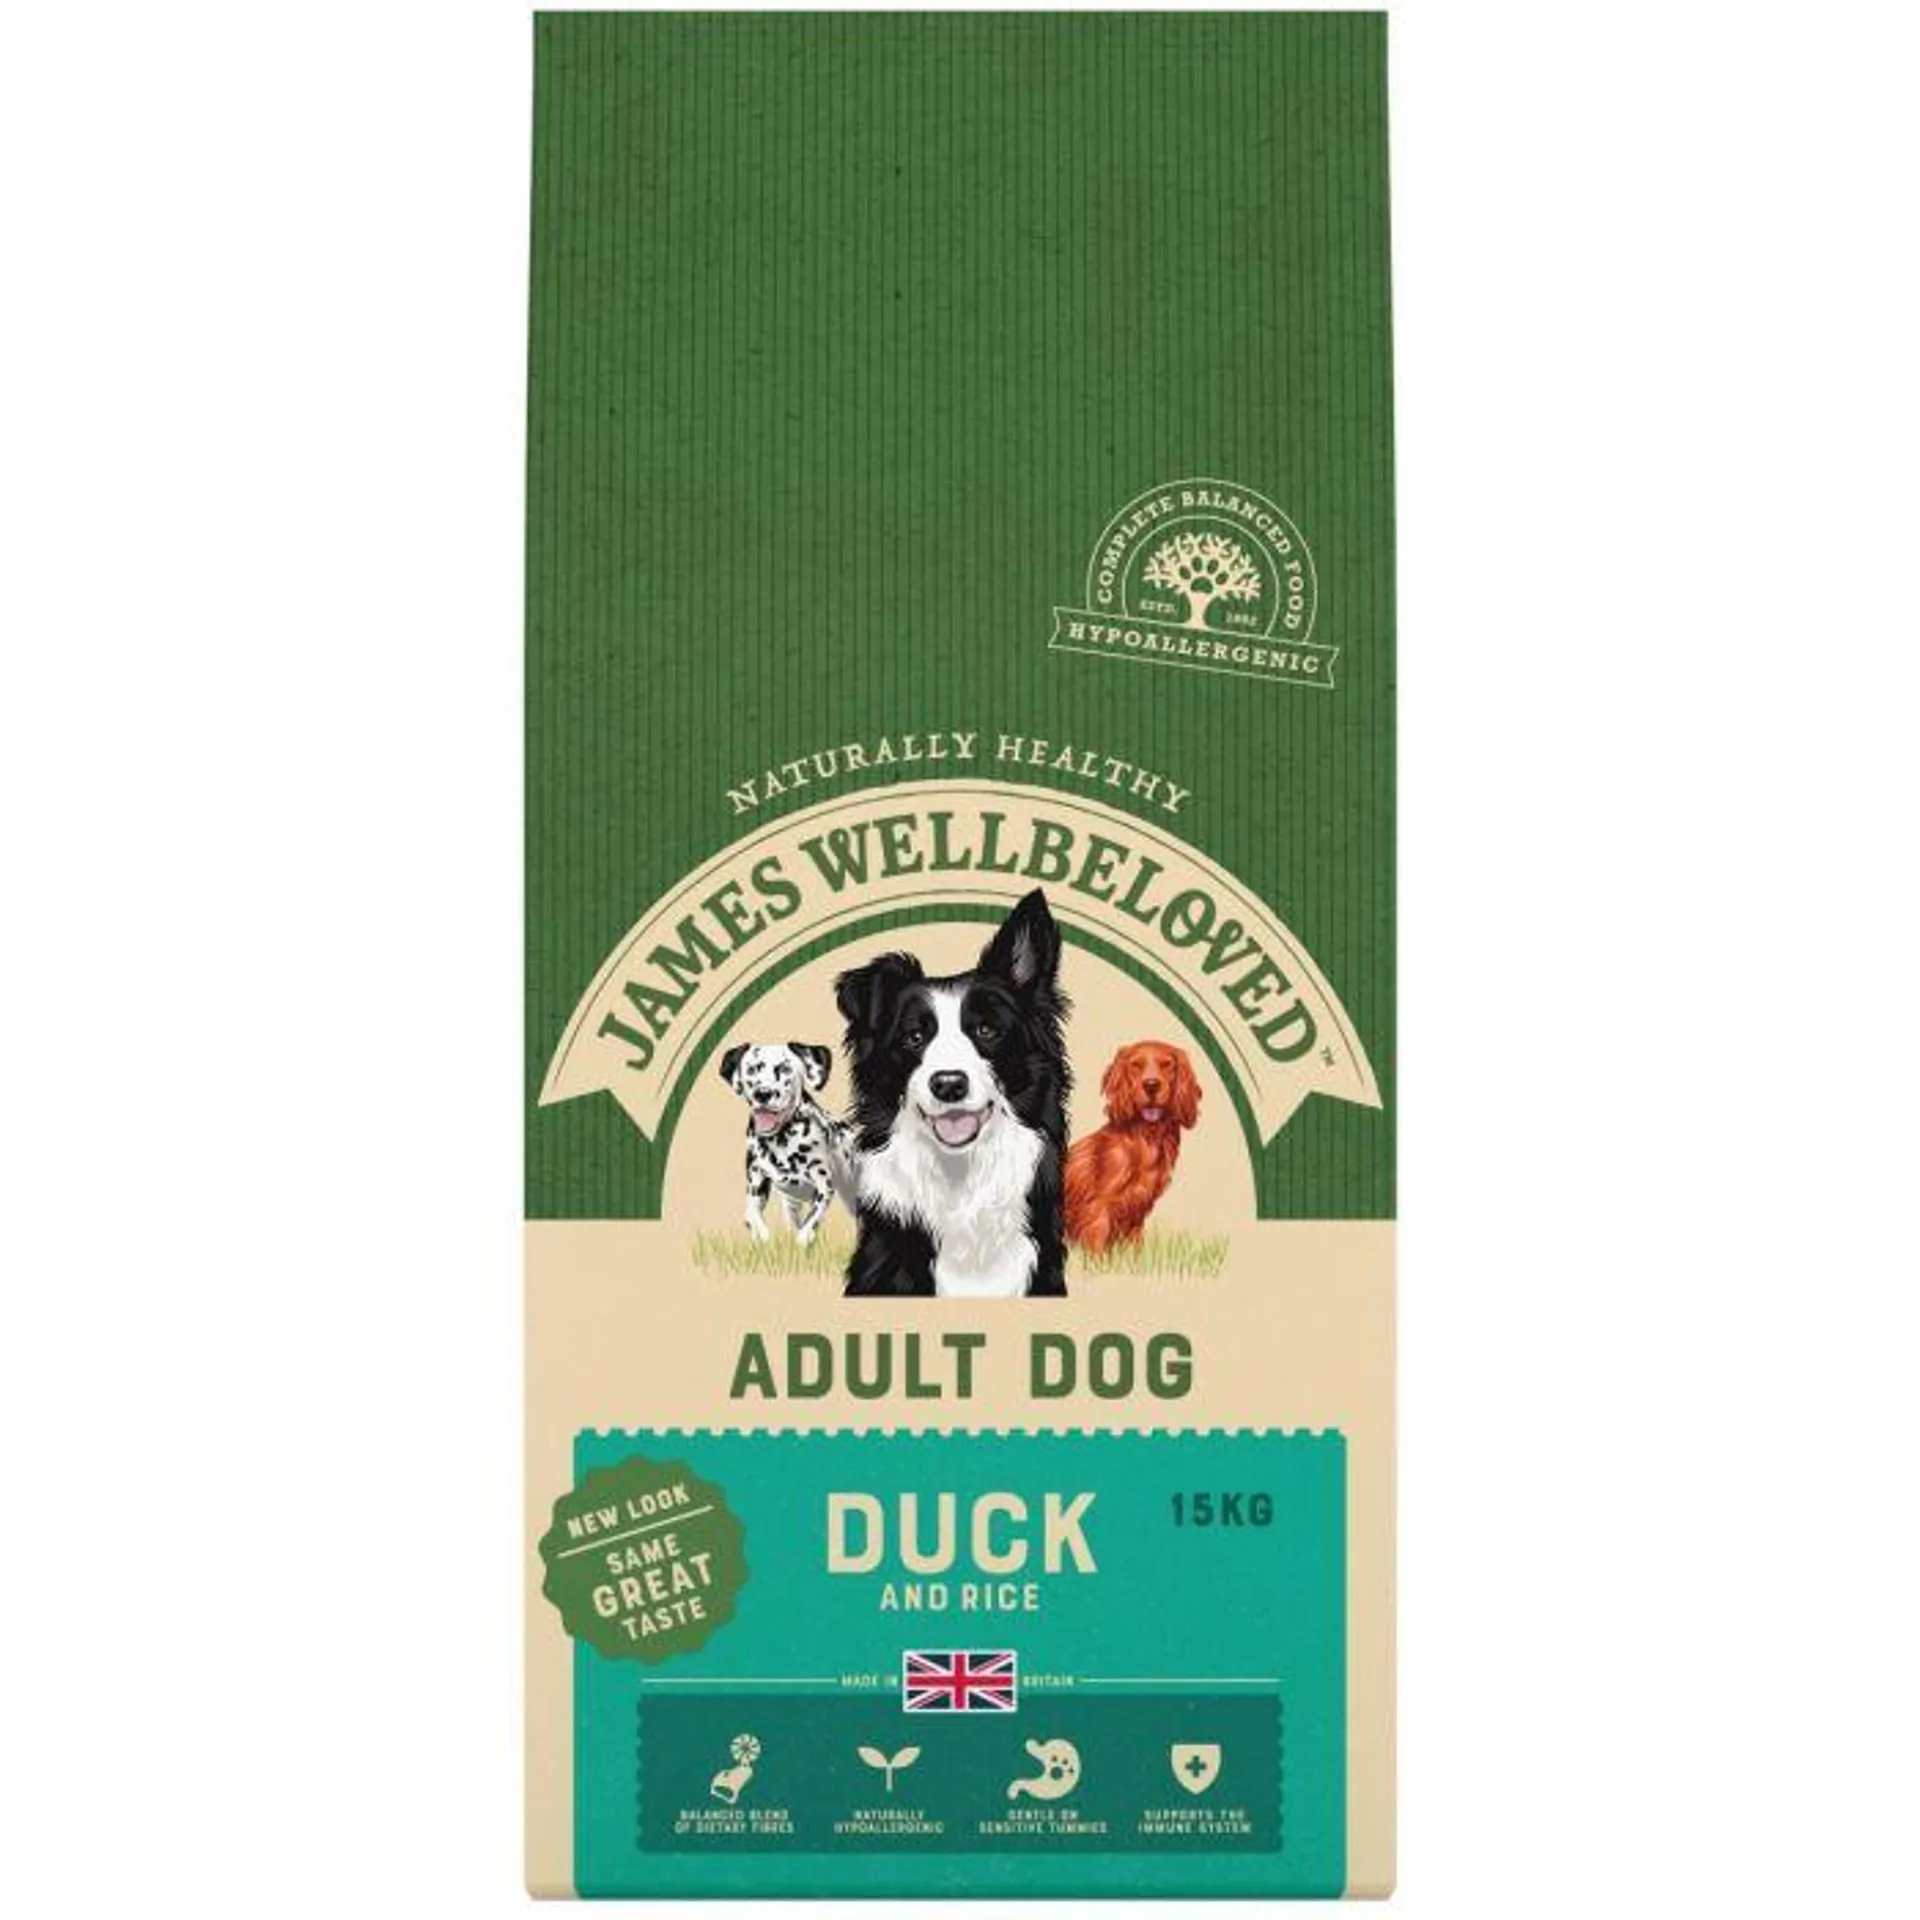 James Wellbeloved Adult Duck and Rice 15kg